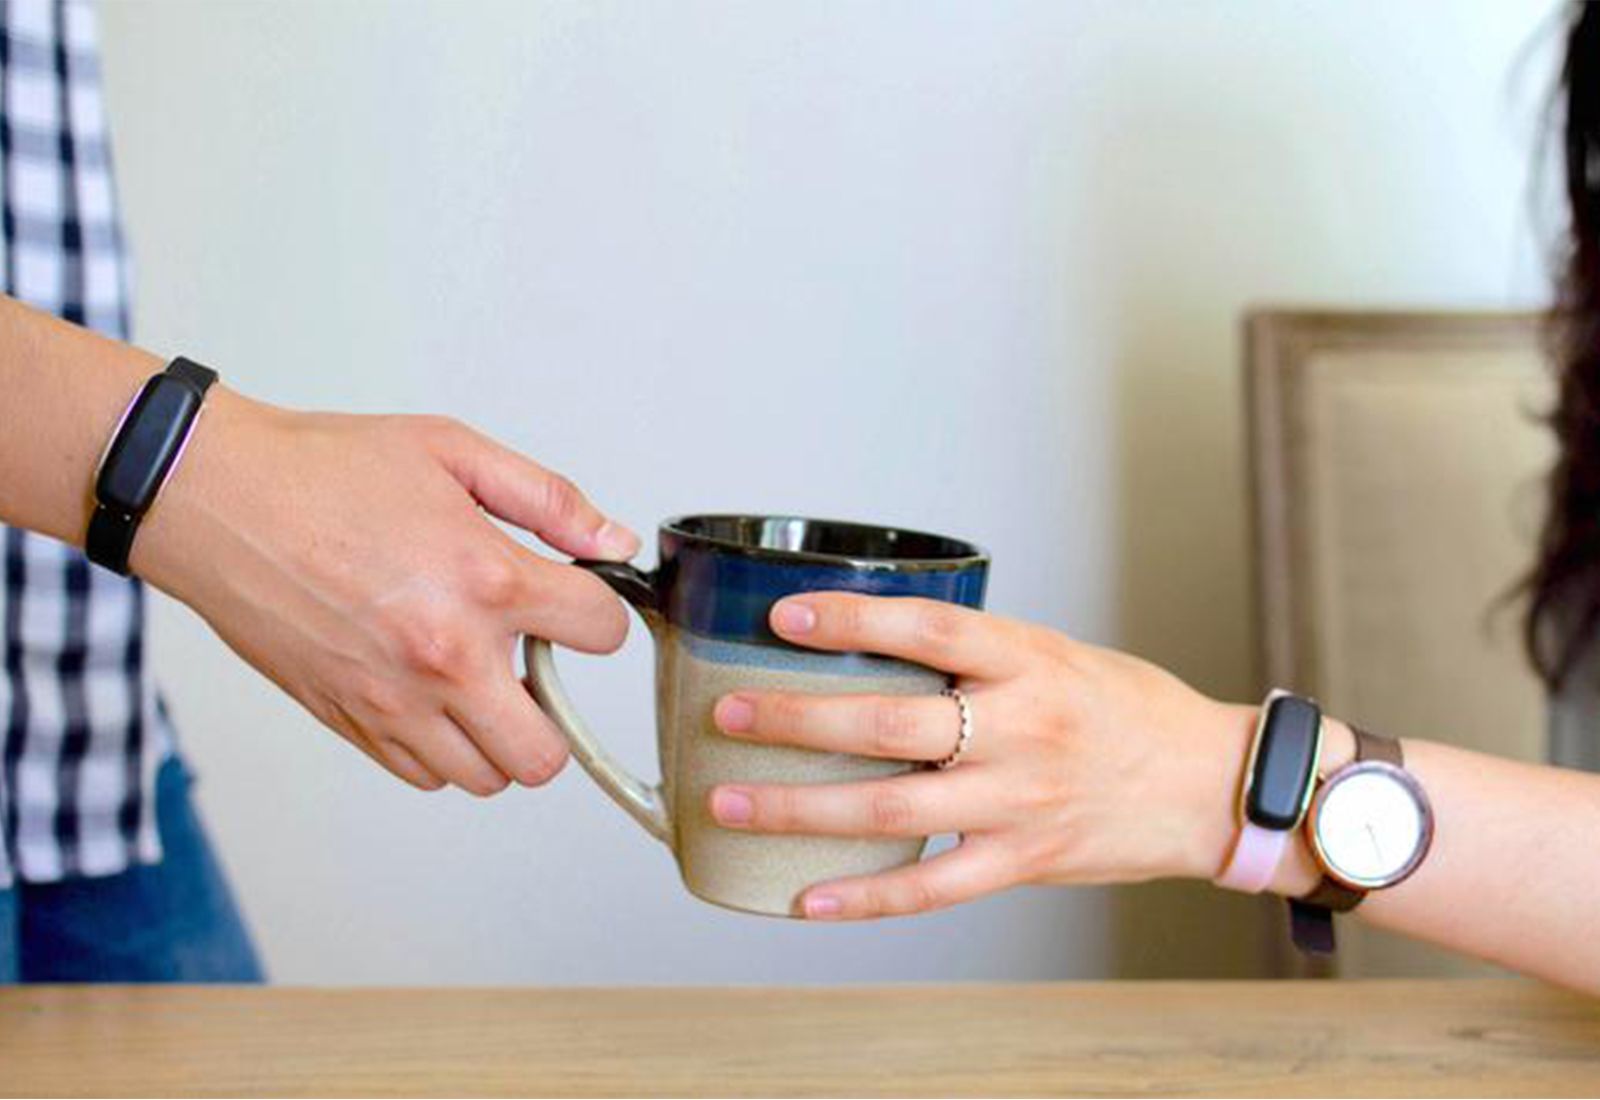 Bond Touch review: Long-distance couples will feel closer together with  this wearable device